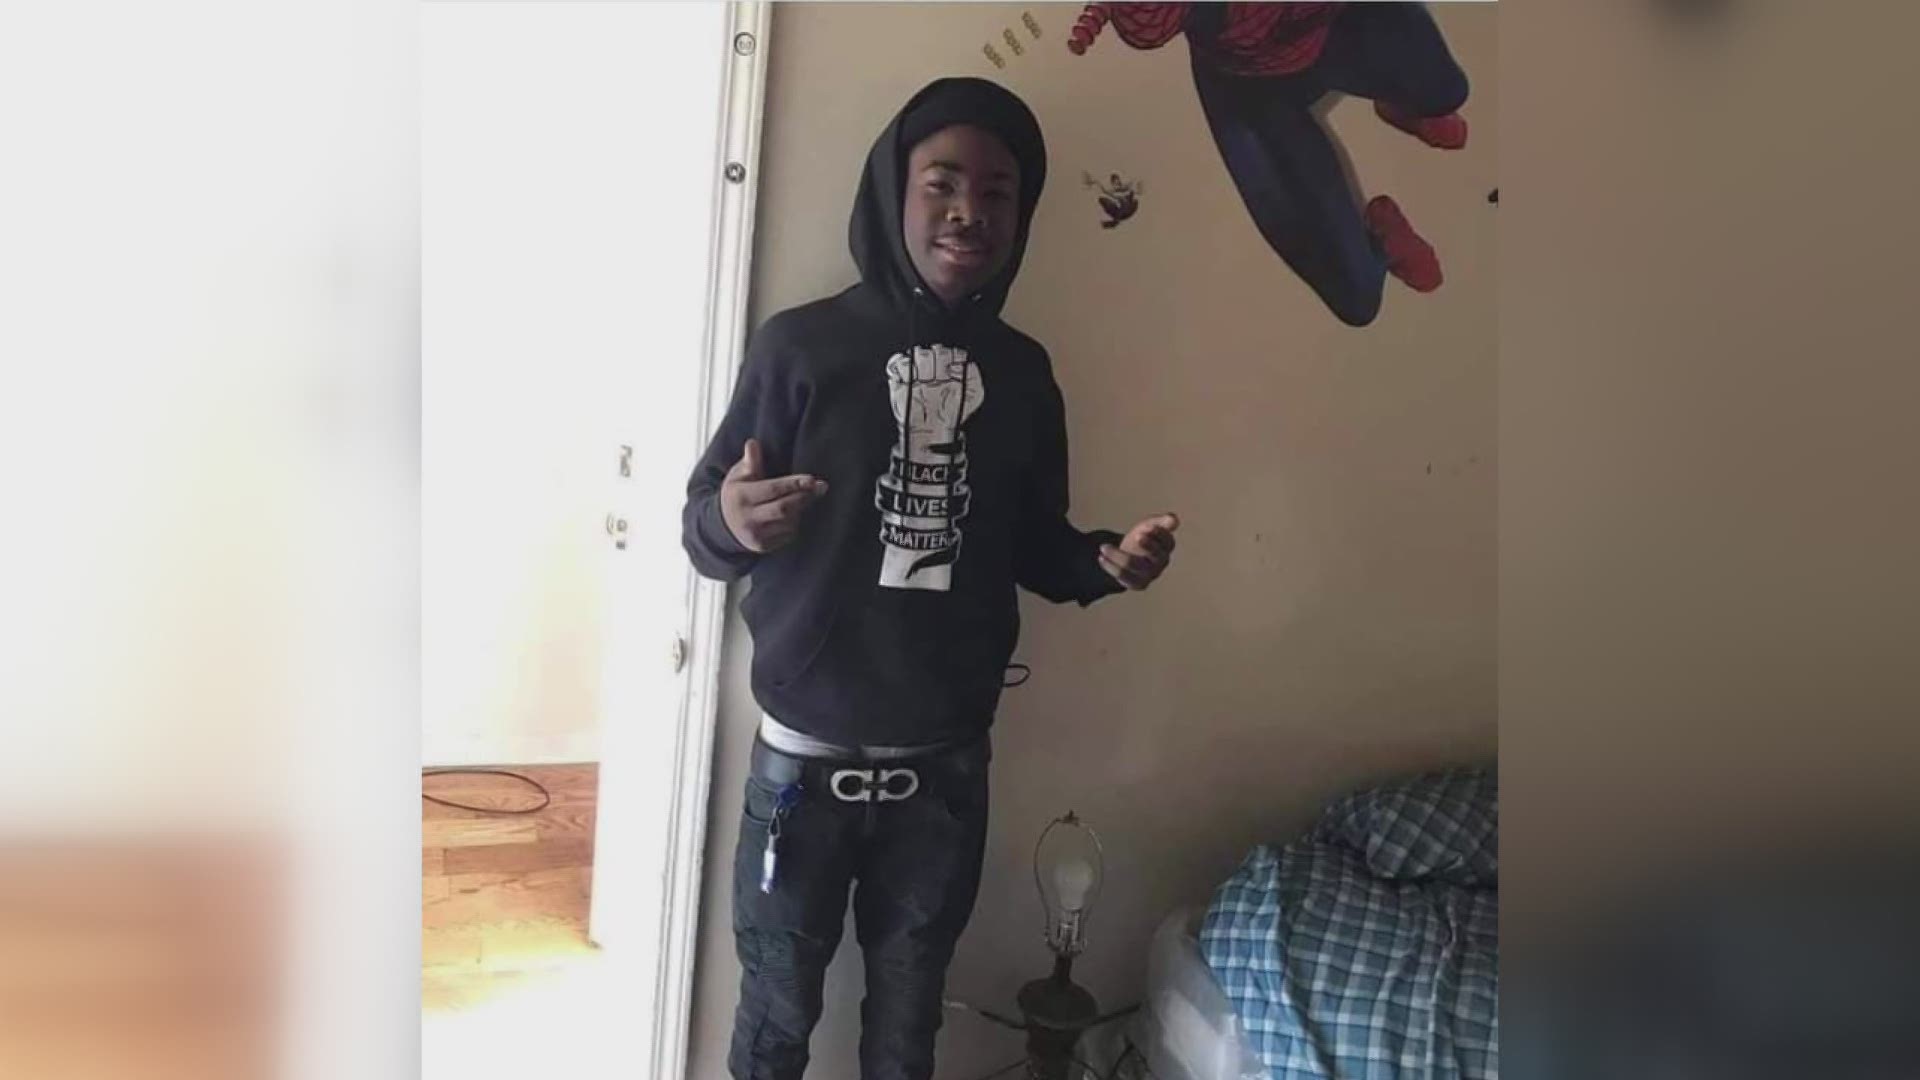 Officials say Demetri Rhodes was gunned down inside a home in the 4100 block of West Broadway.